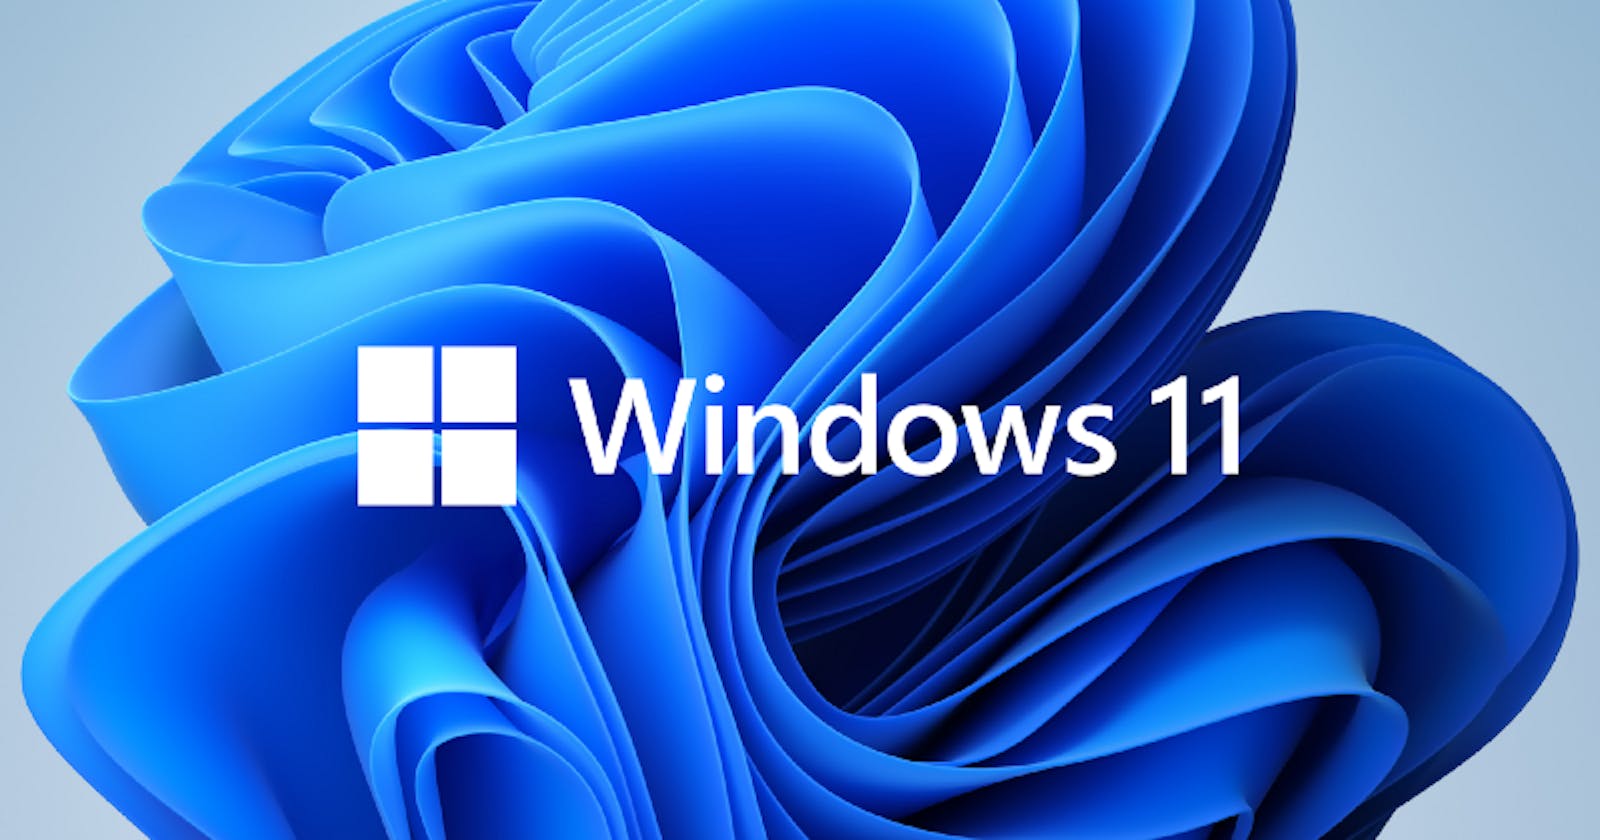 Windows 11: Same old windows but a fresher new look